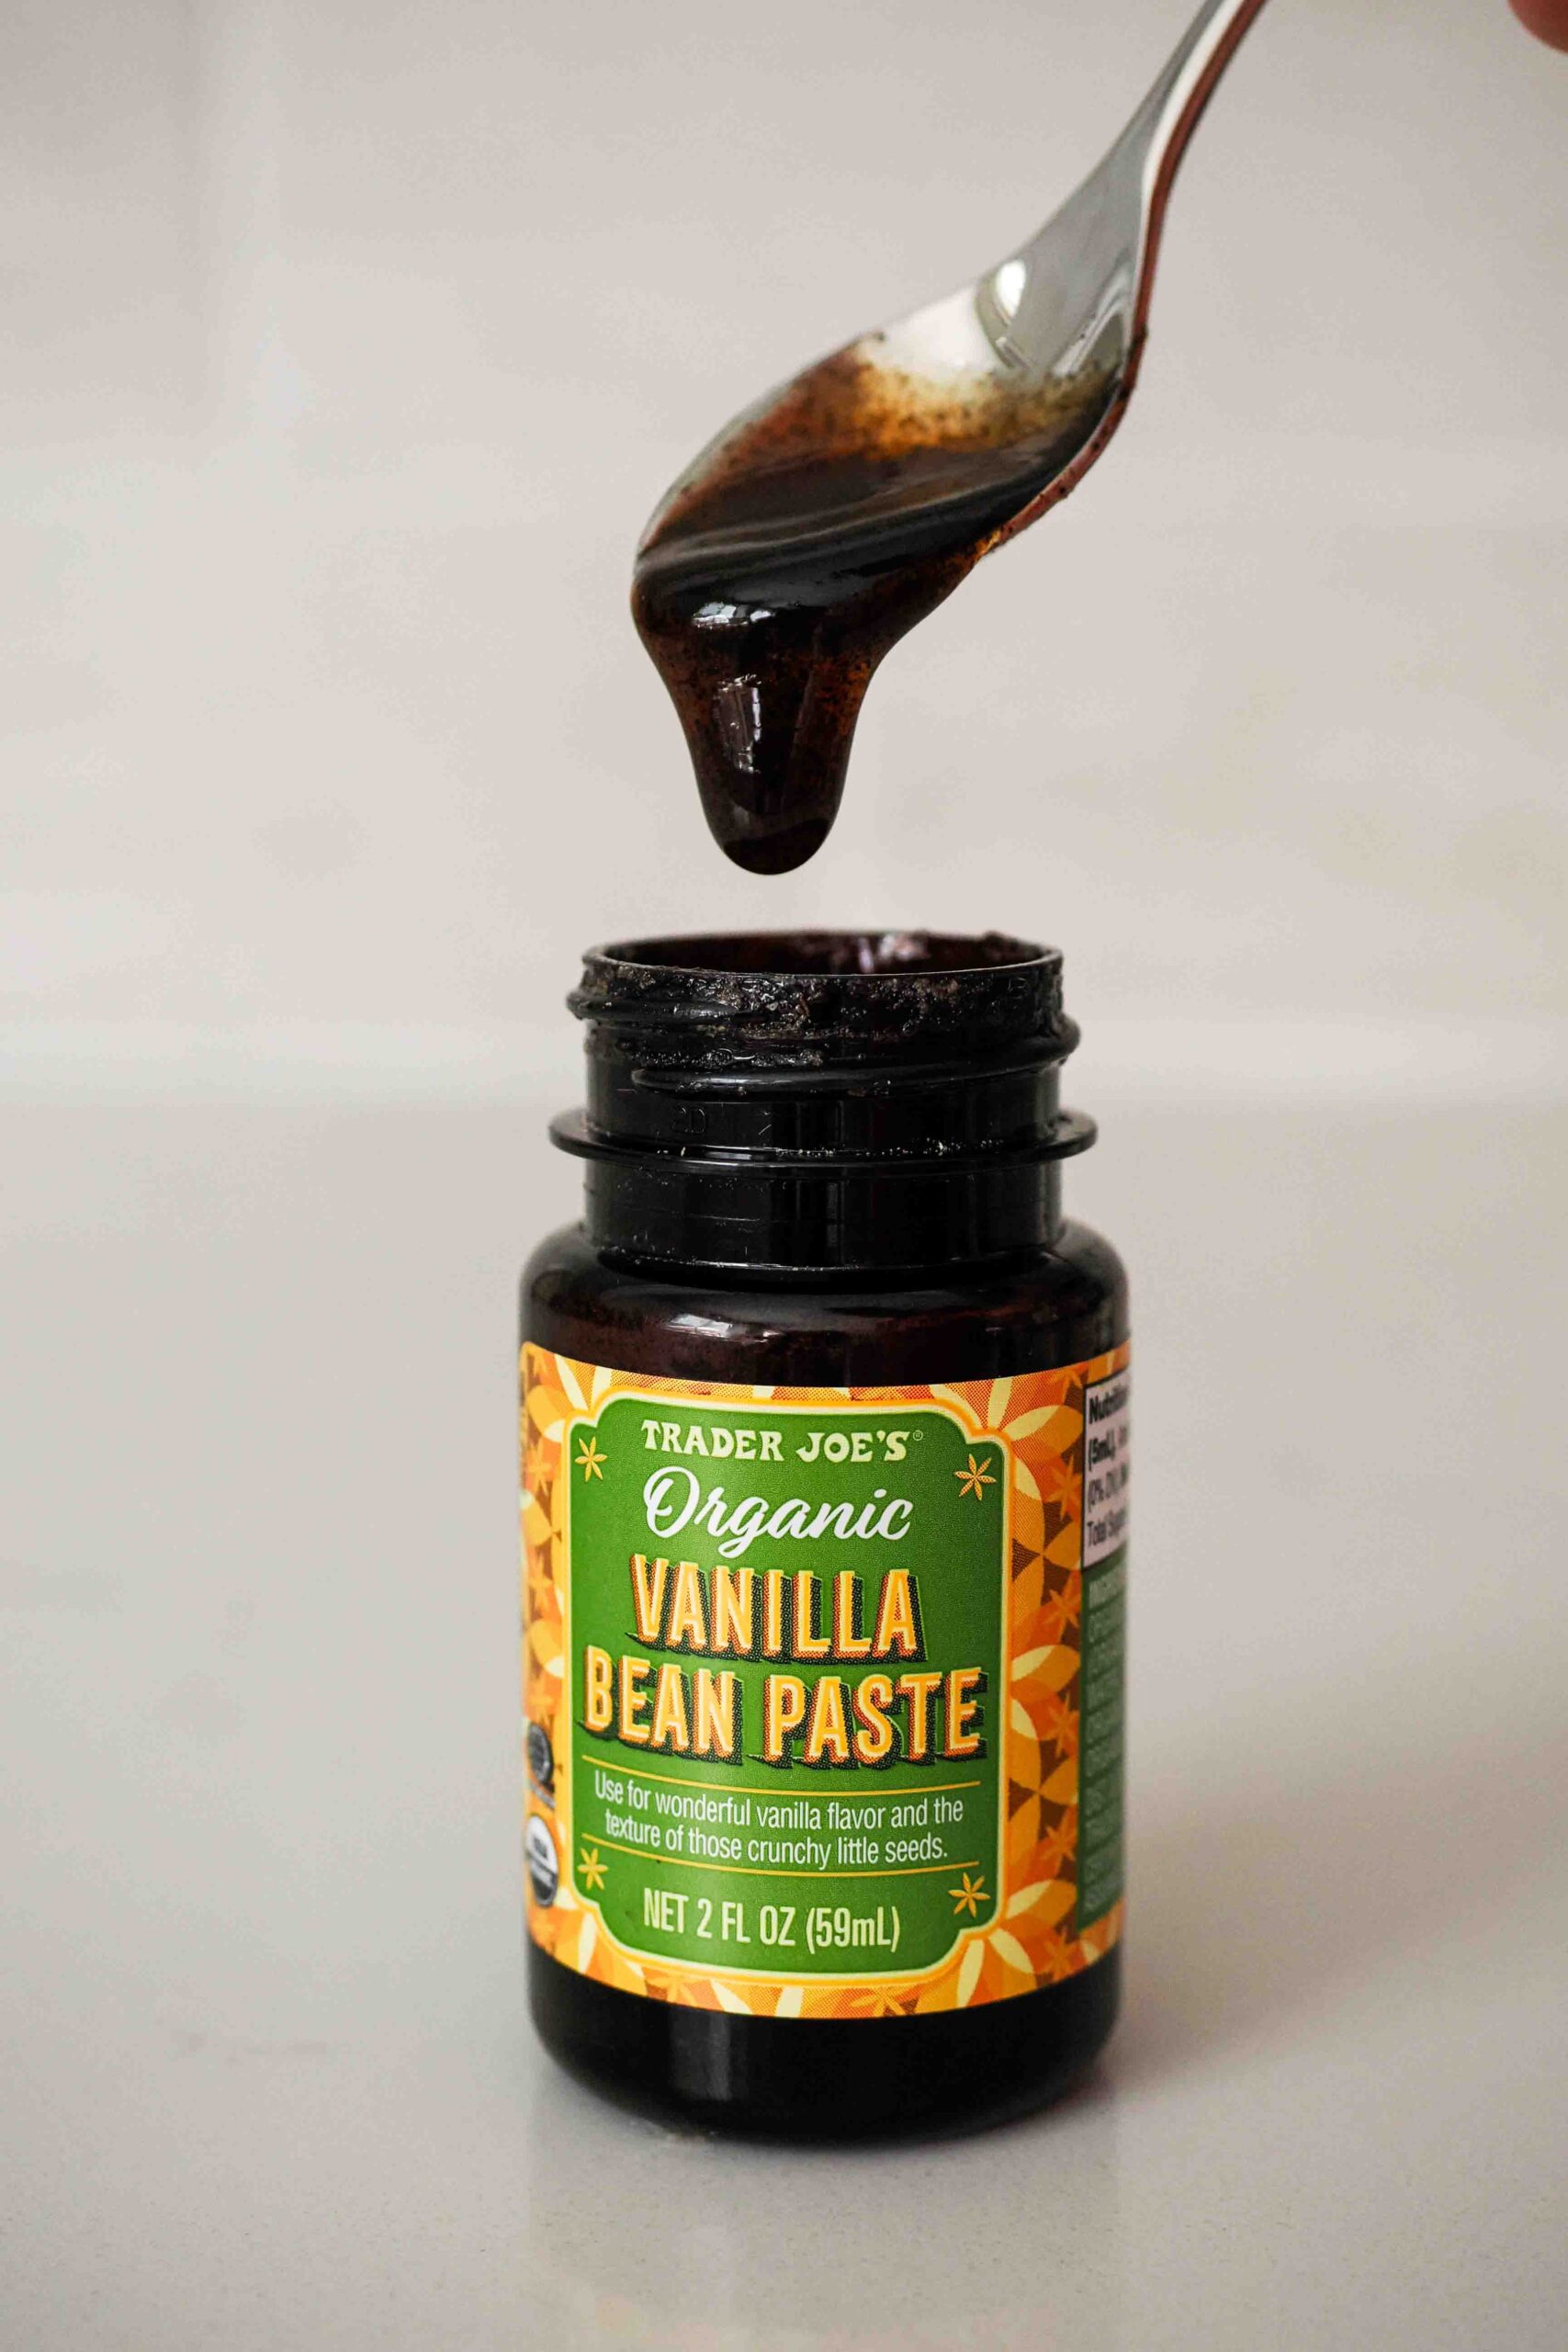 Trader Joe's organic vanilla bean paste drips off a spoon into its container.